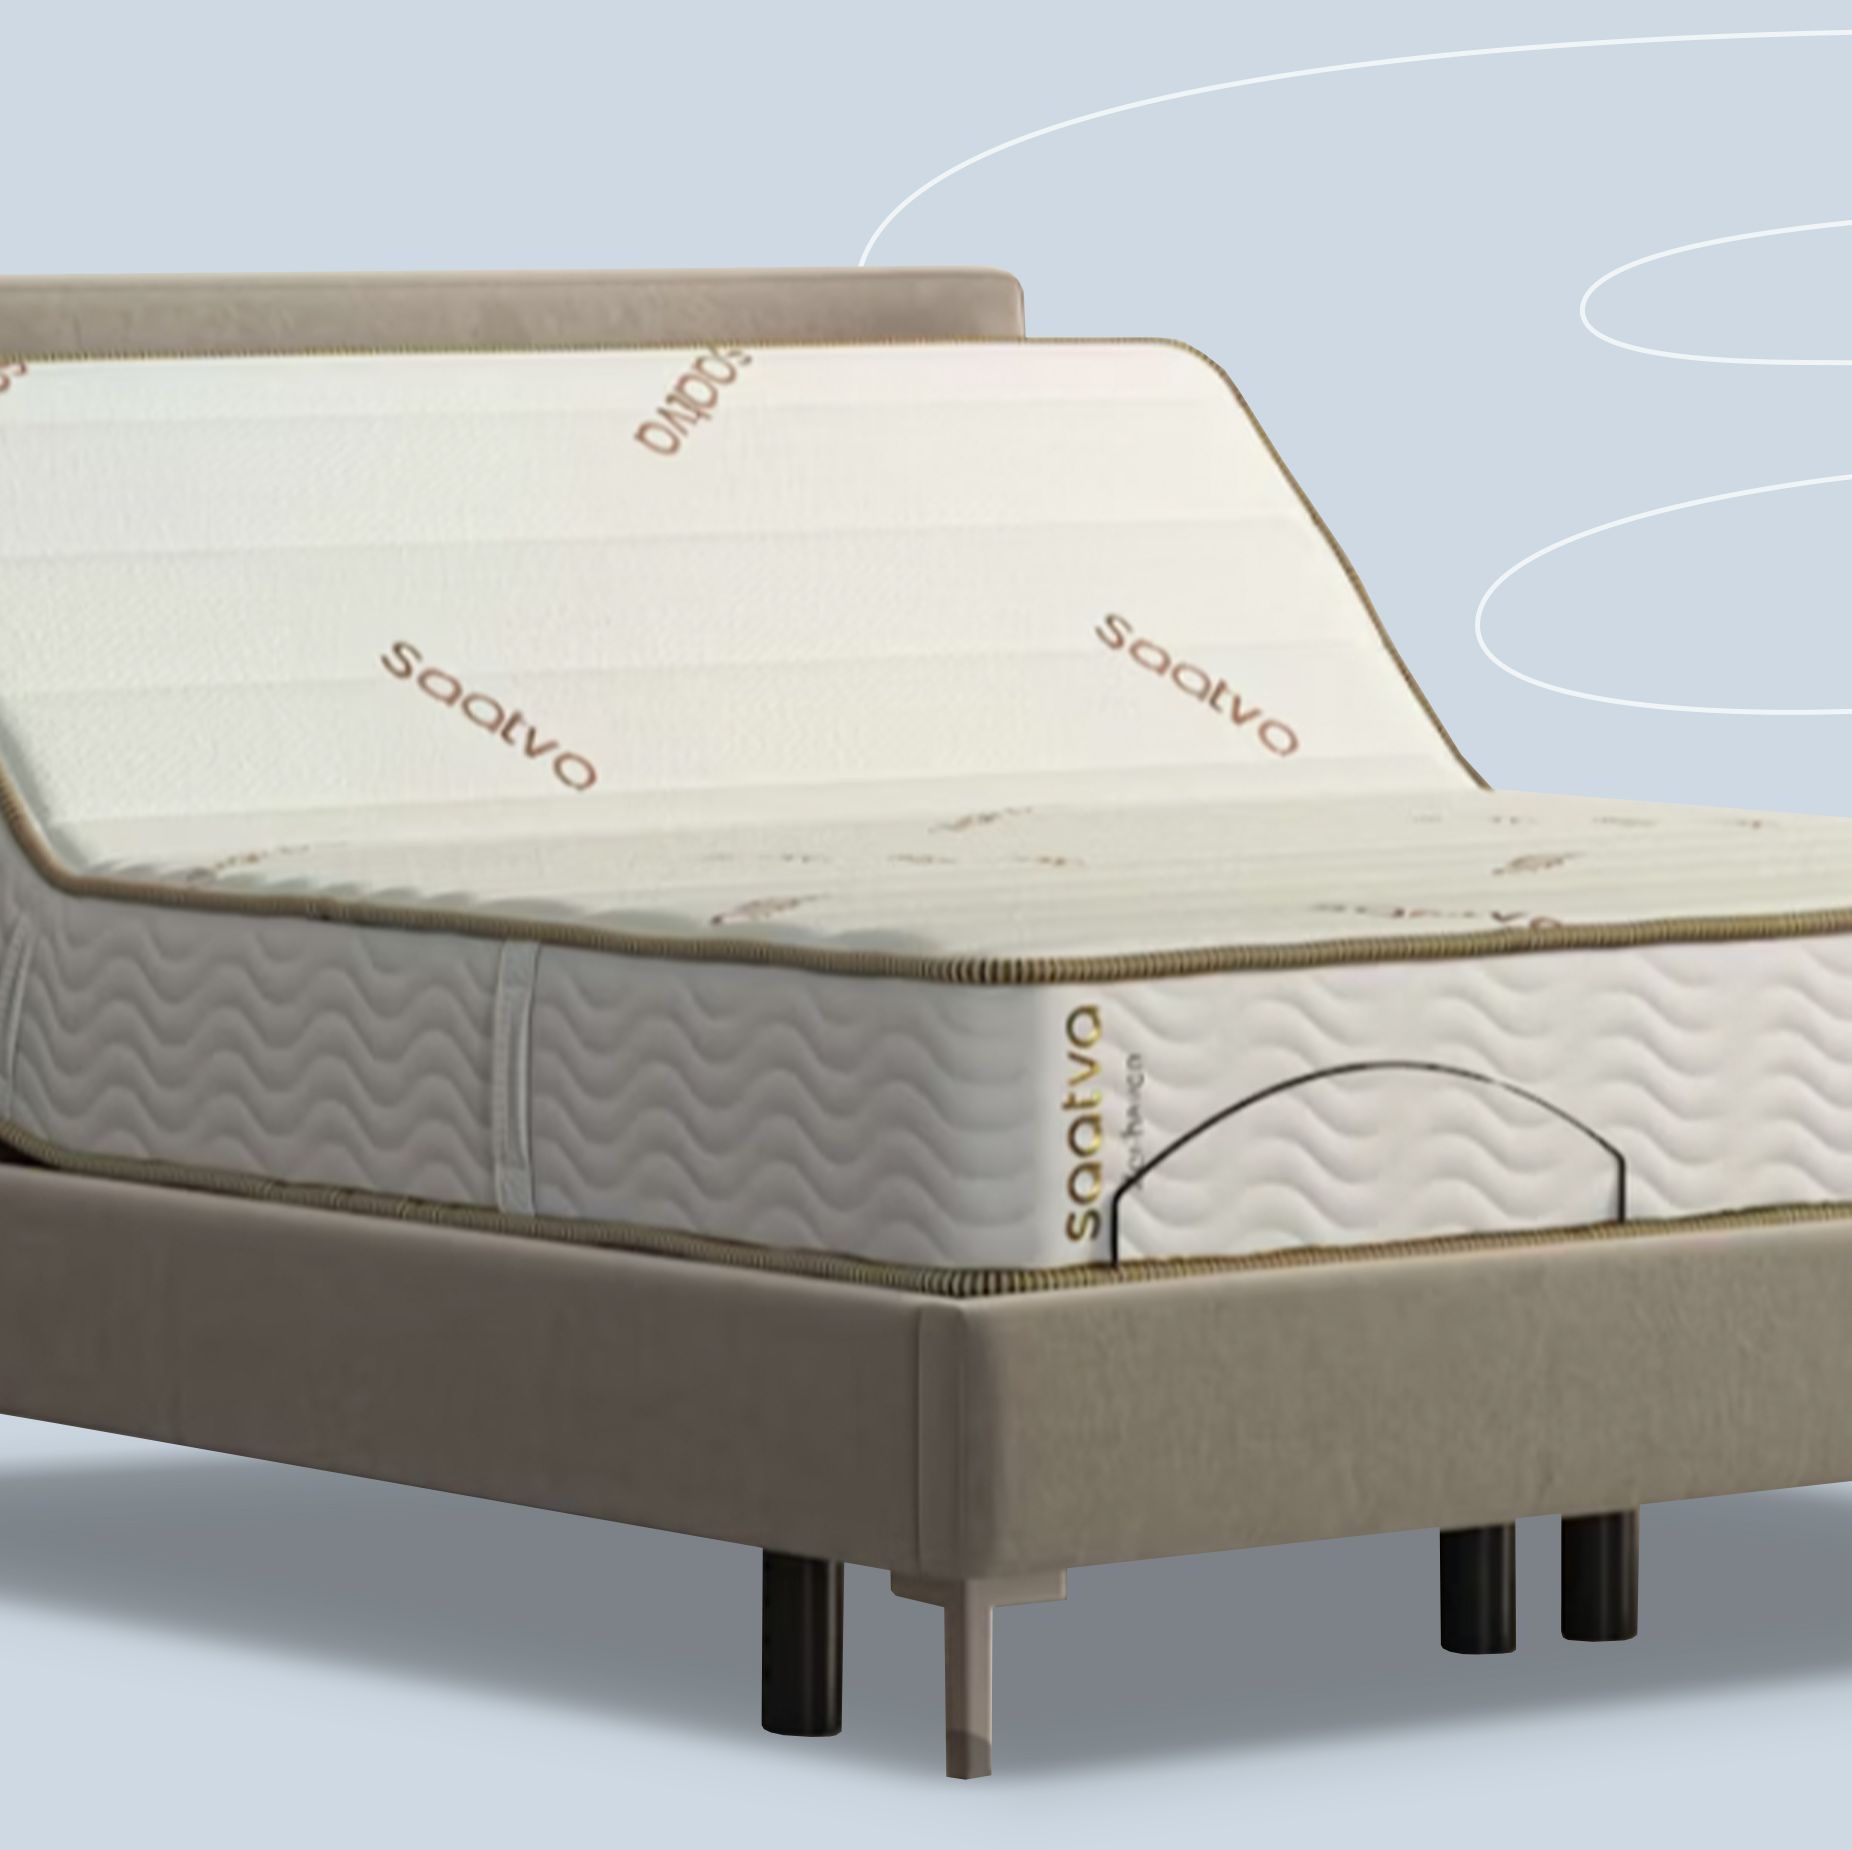 Save Up to $600 on Our Favorite Mattresses During Saatva's Black Friday Sale